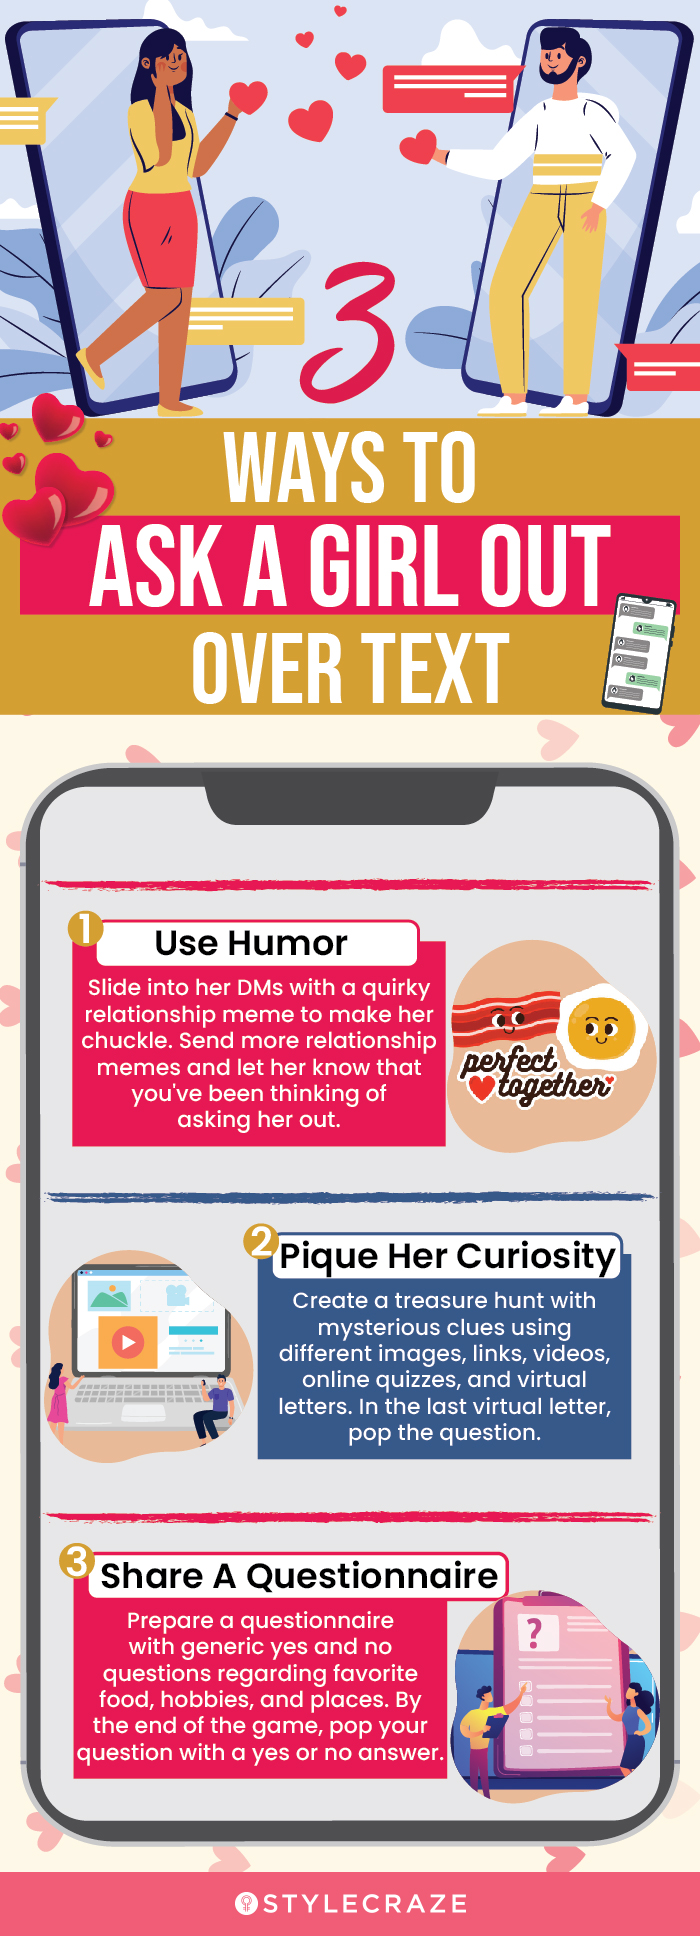 3 ways to ask a girl out over text (infographic)